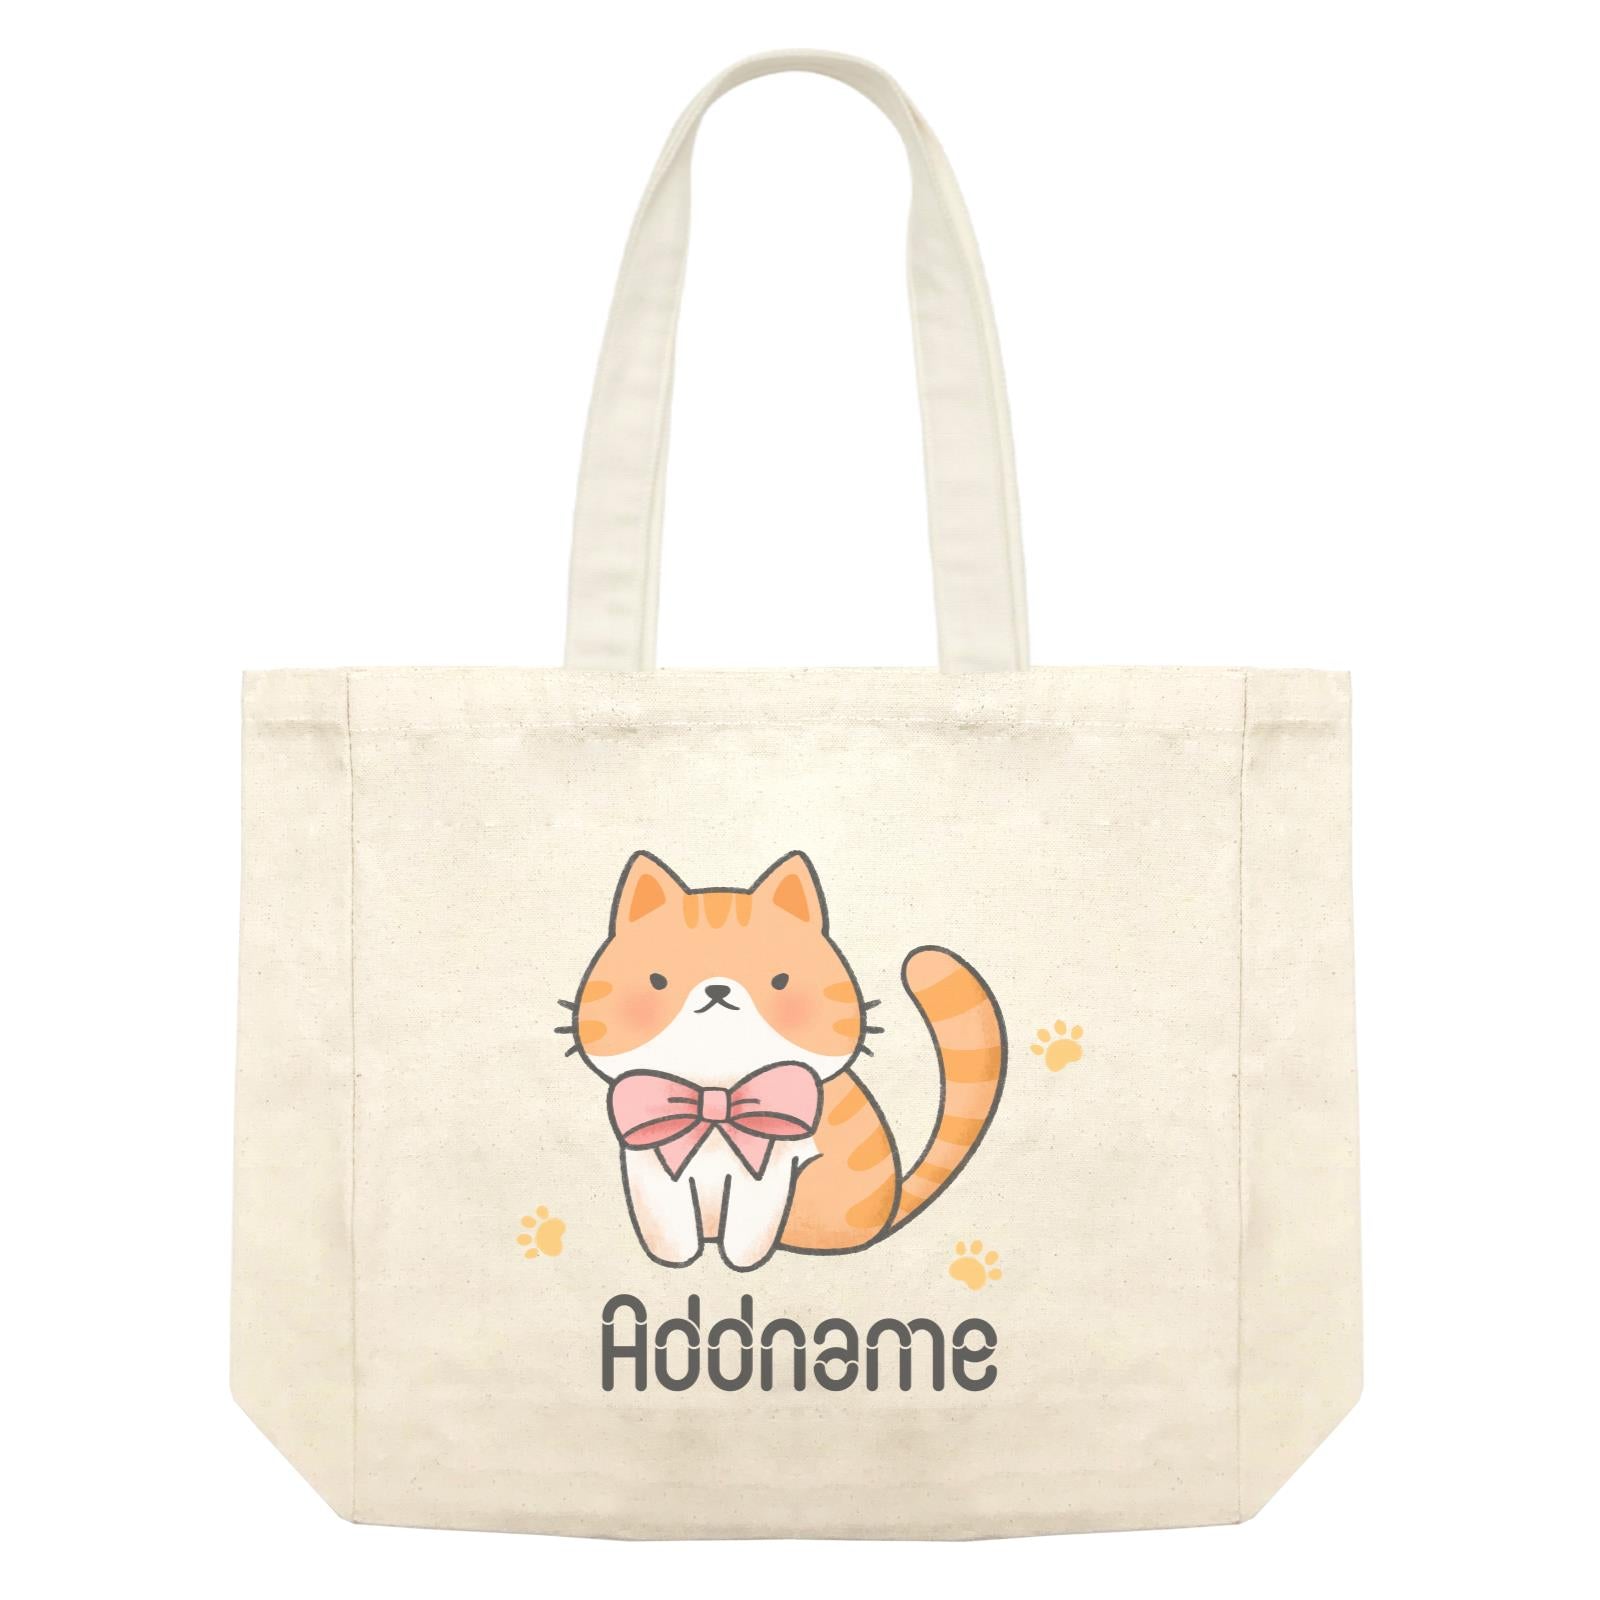 Cute Hand Drawn Style Brown Cat with Ribbon Addname Shopping Bag